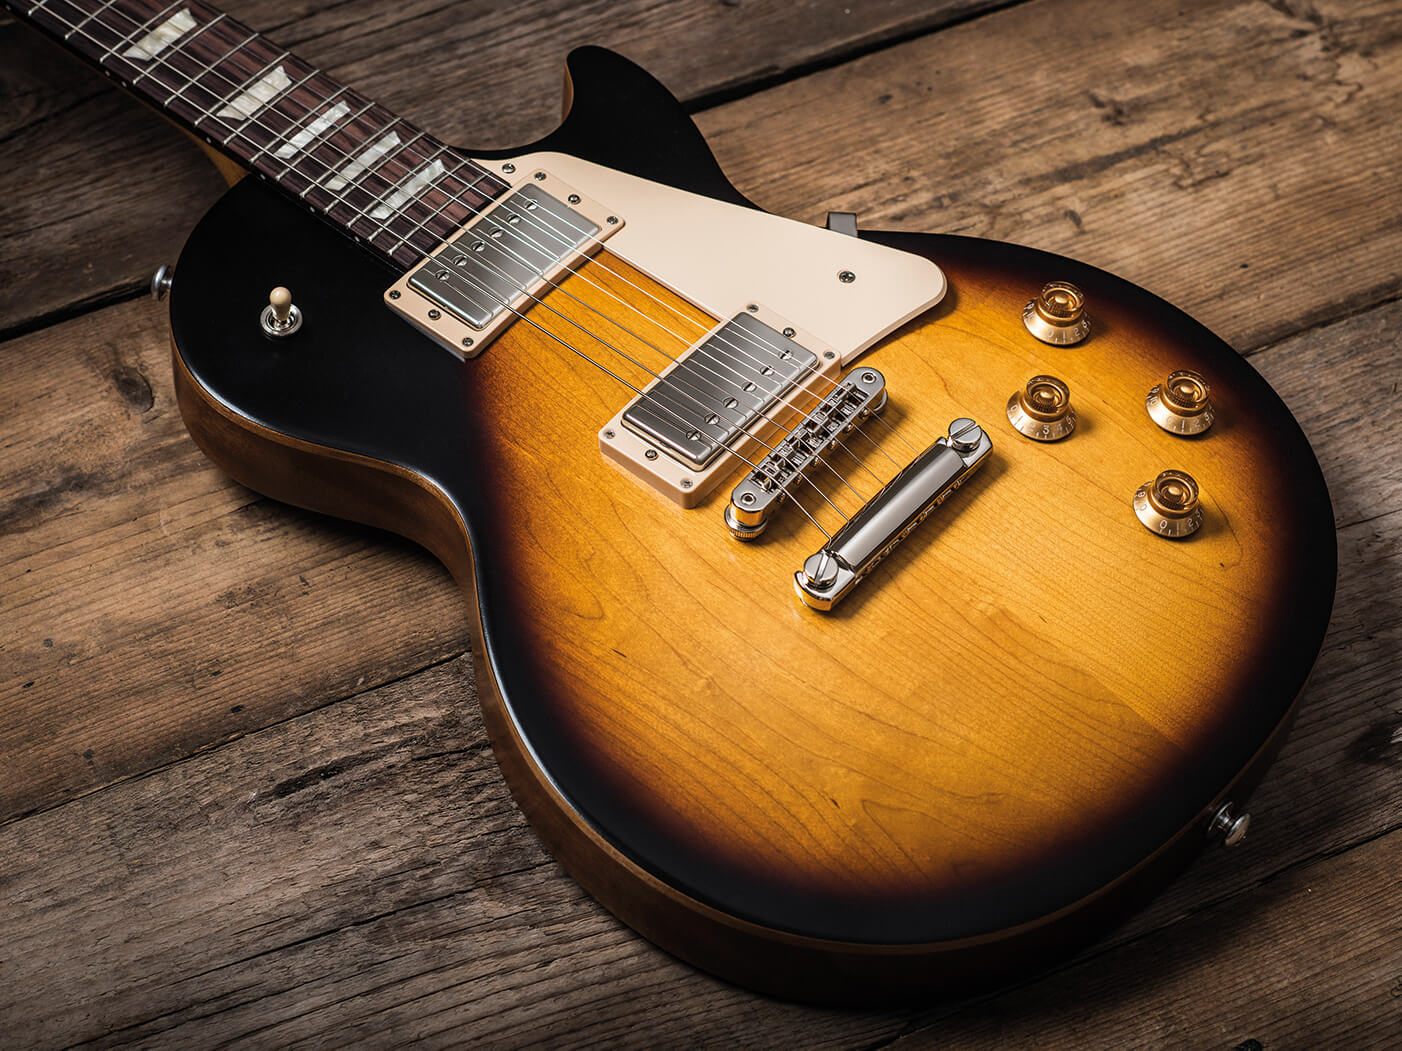 The Les Paul Tribute in Satin Tobacco Burst gibson